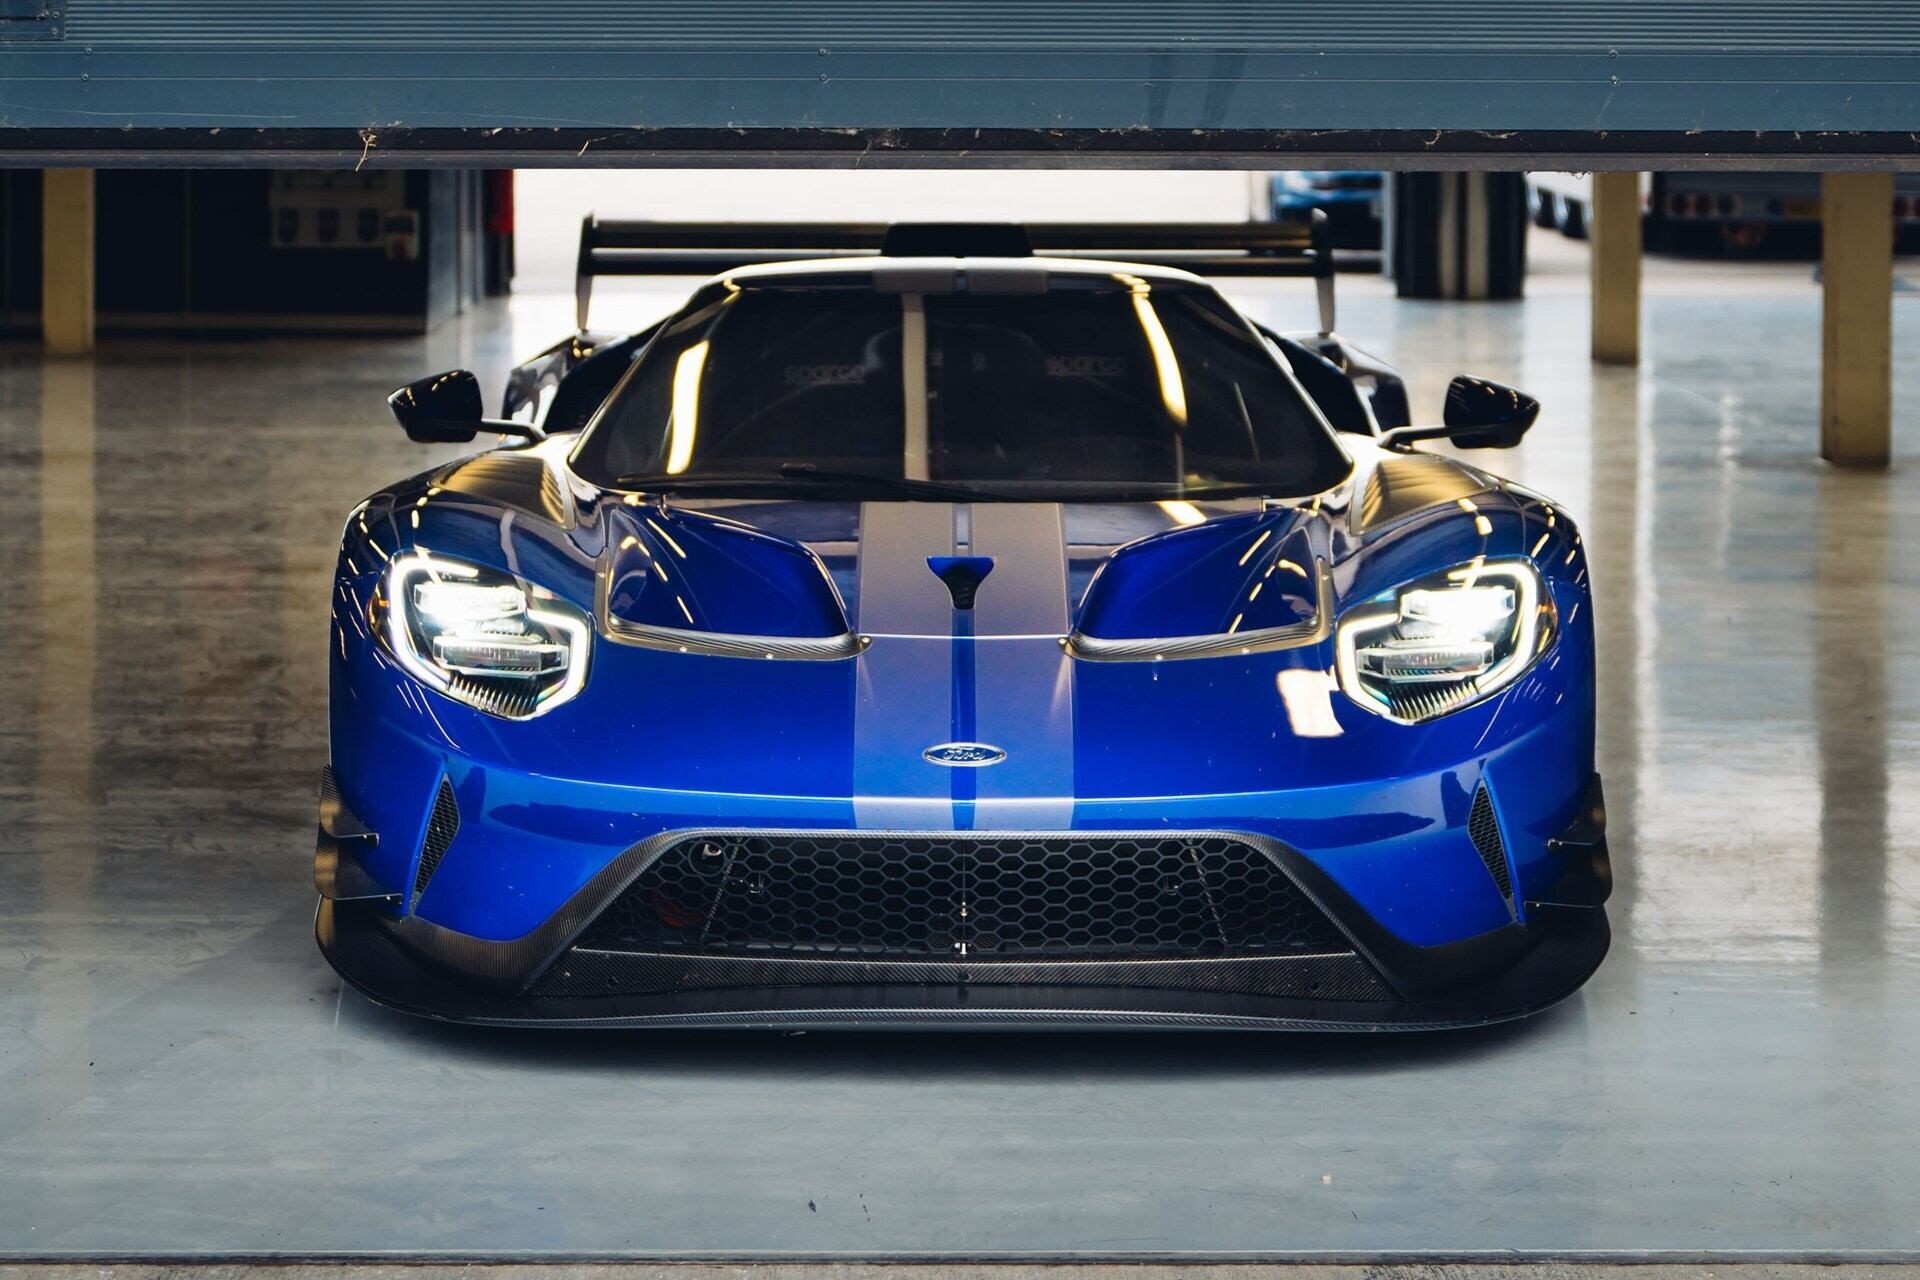 Frontal view of a blue 2020 Ford GT MK II track-only supercar